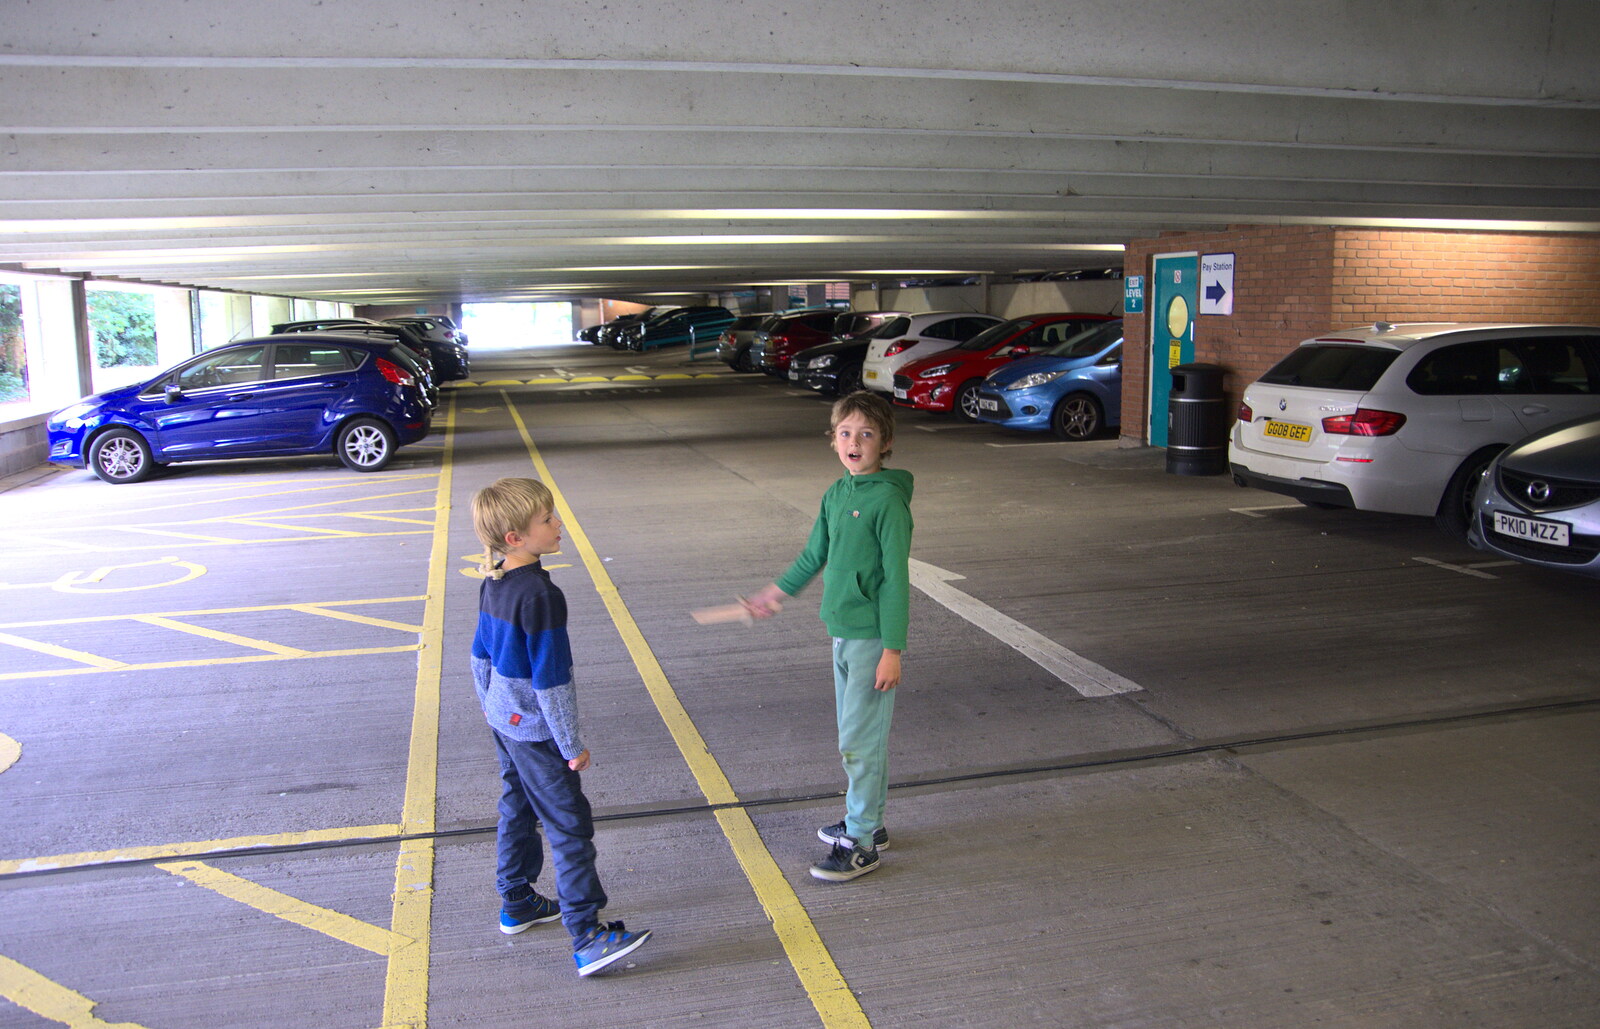 Harry and Fred in Bridgefoot Car park from A Postcard from Stratford-upon-Avon, Warwickshire - 9th September 2018